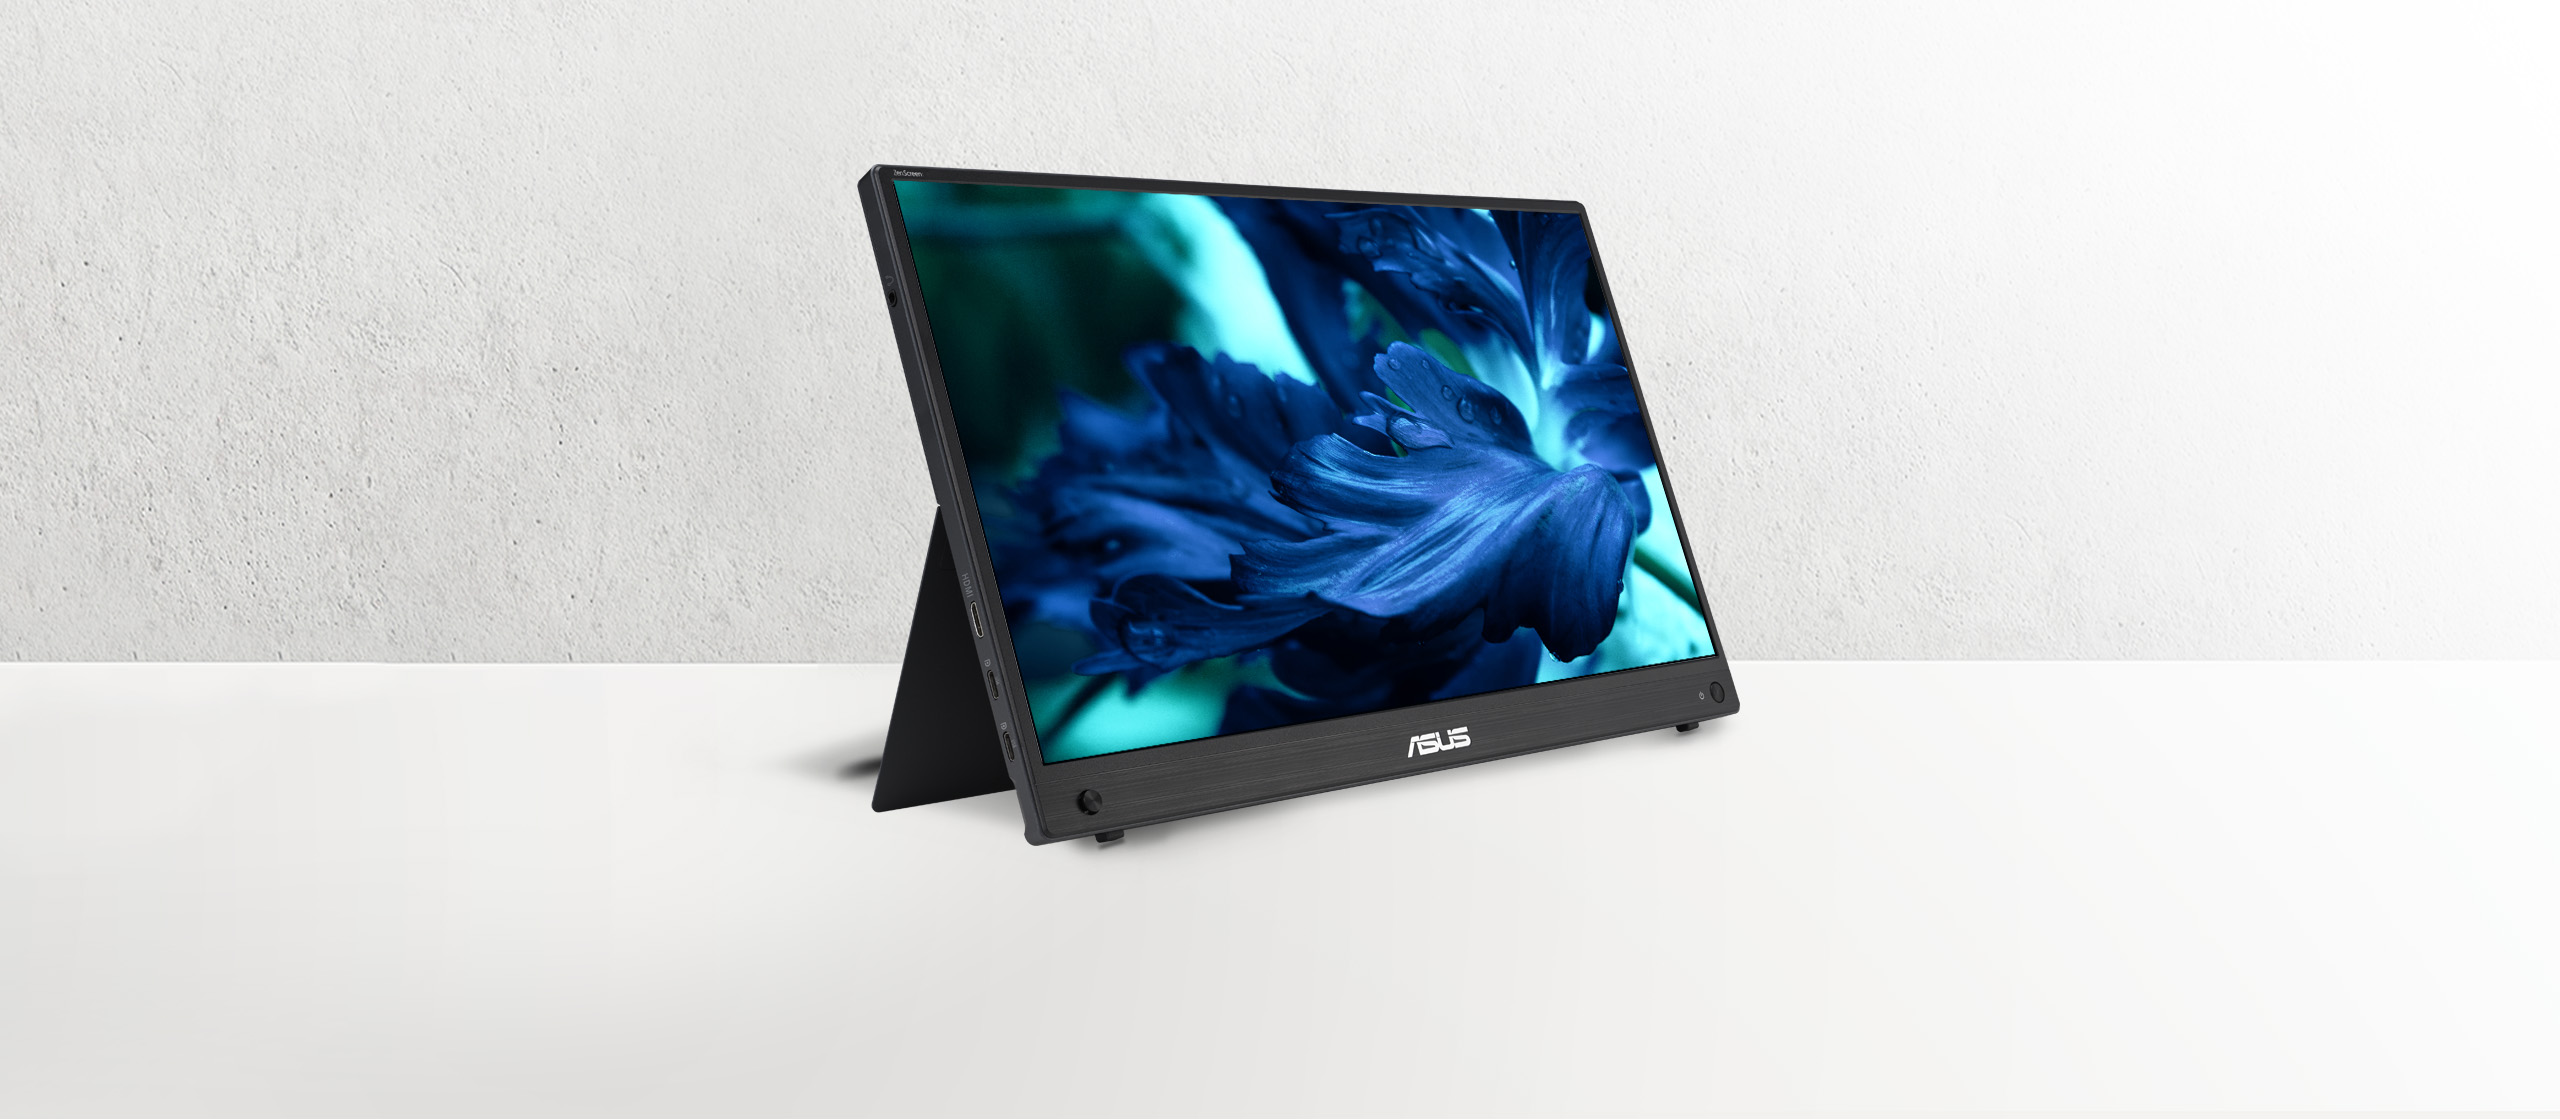 The ZenScreen MB16AHG  is a 15.6-inch IPS FHD portable monitor with fast 144Hz refresh rate and Adaptive-Sync, FreeSync certified, technology to eliminate screen tearing and choppy frame rates for the smoother-than-ever experience.